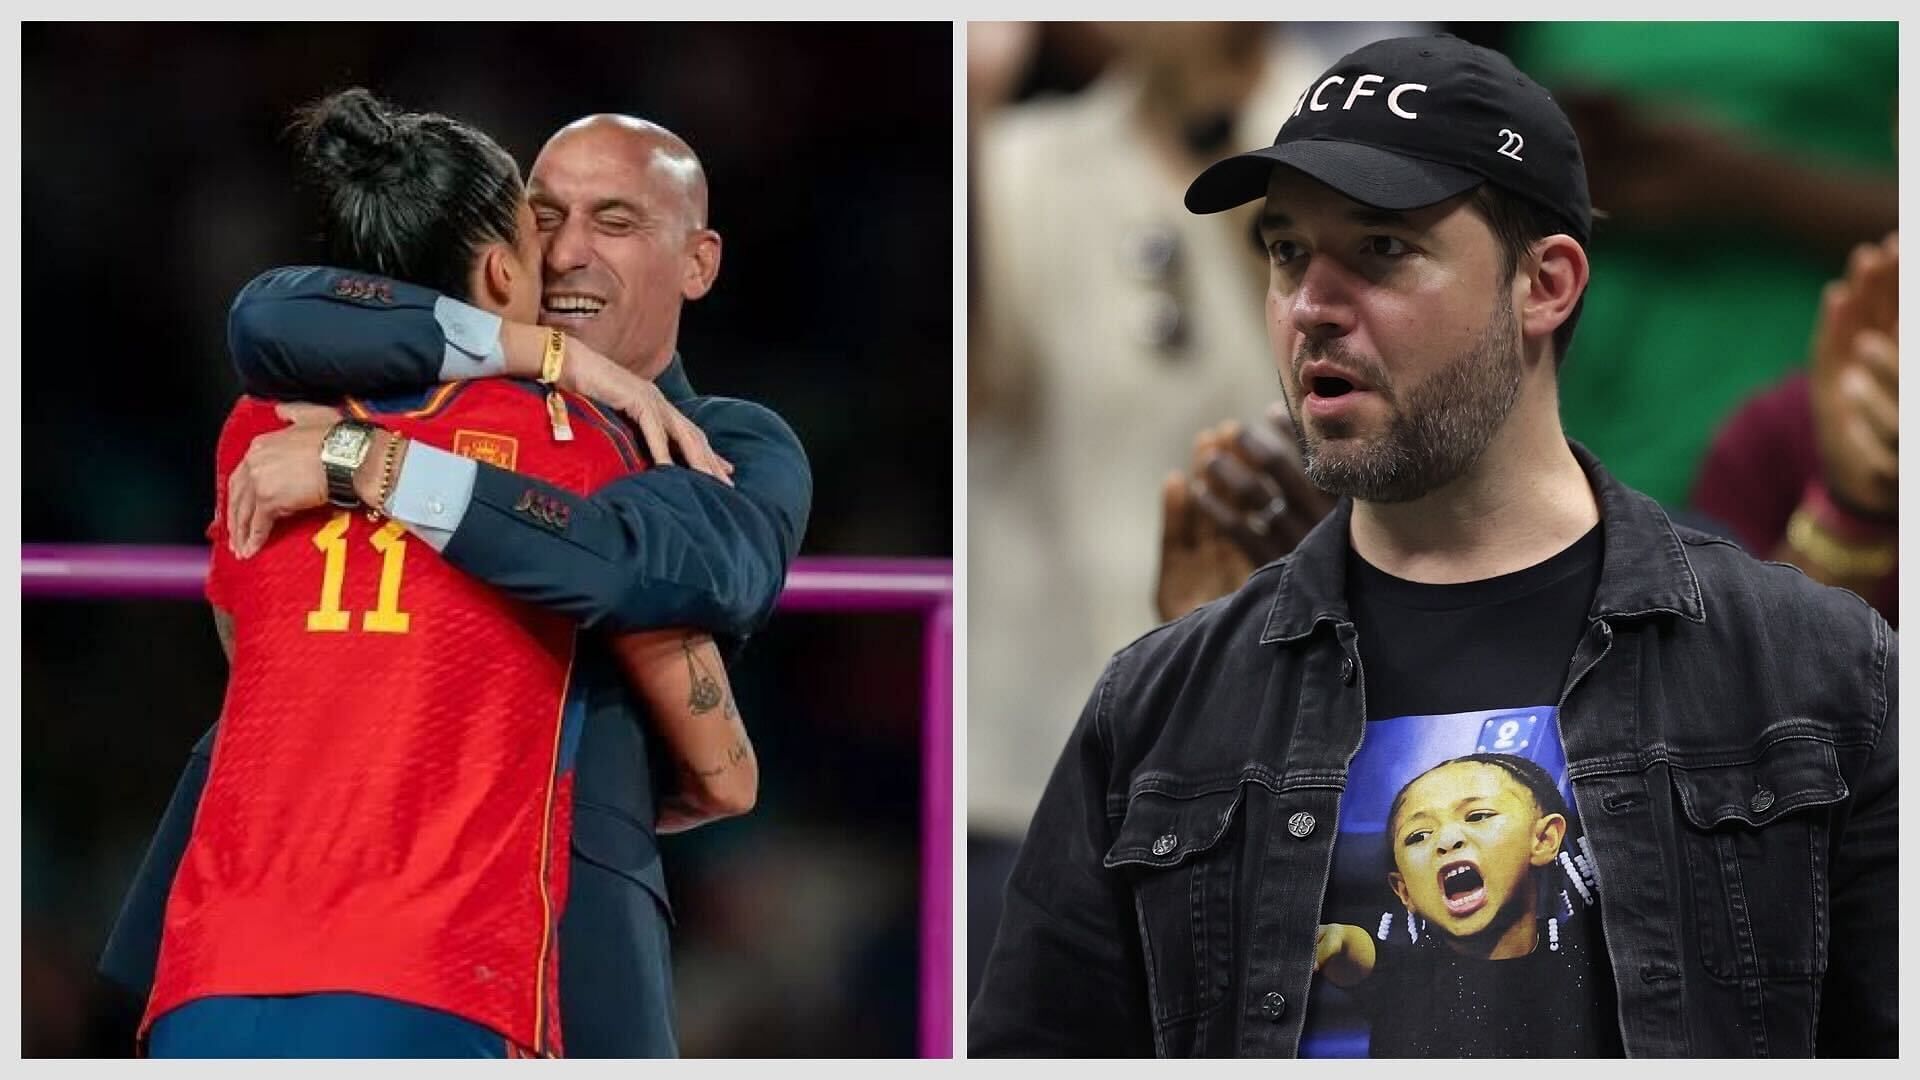 Alexis Ohanian was in shock after Spanish football President controversially kisses player Jenni Hermoso after World Cup win